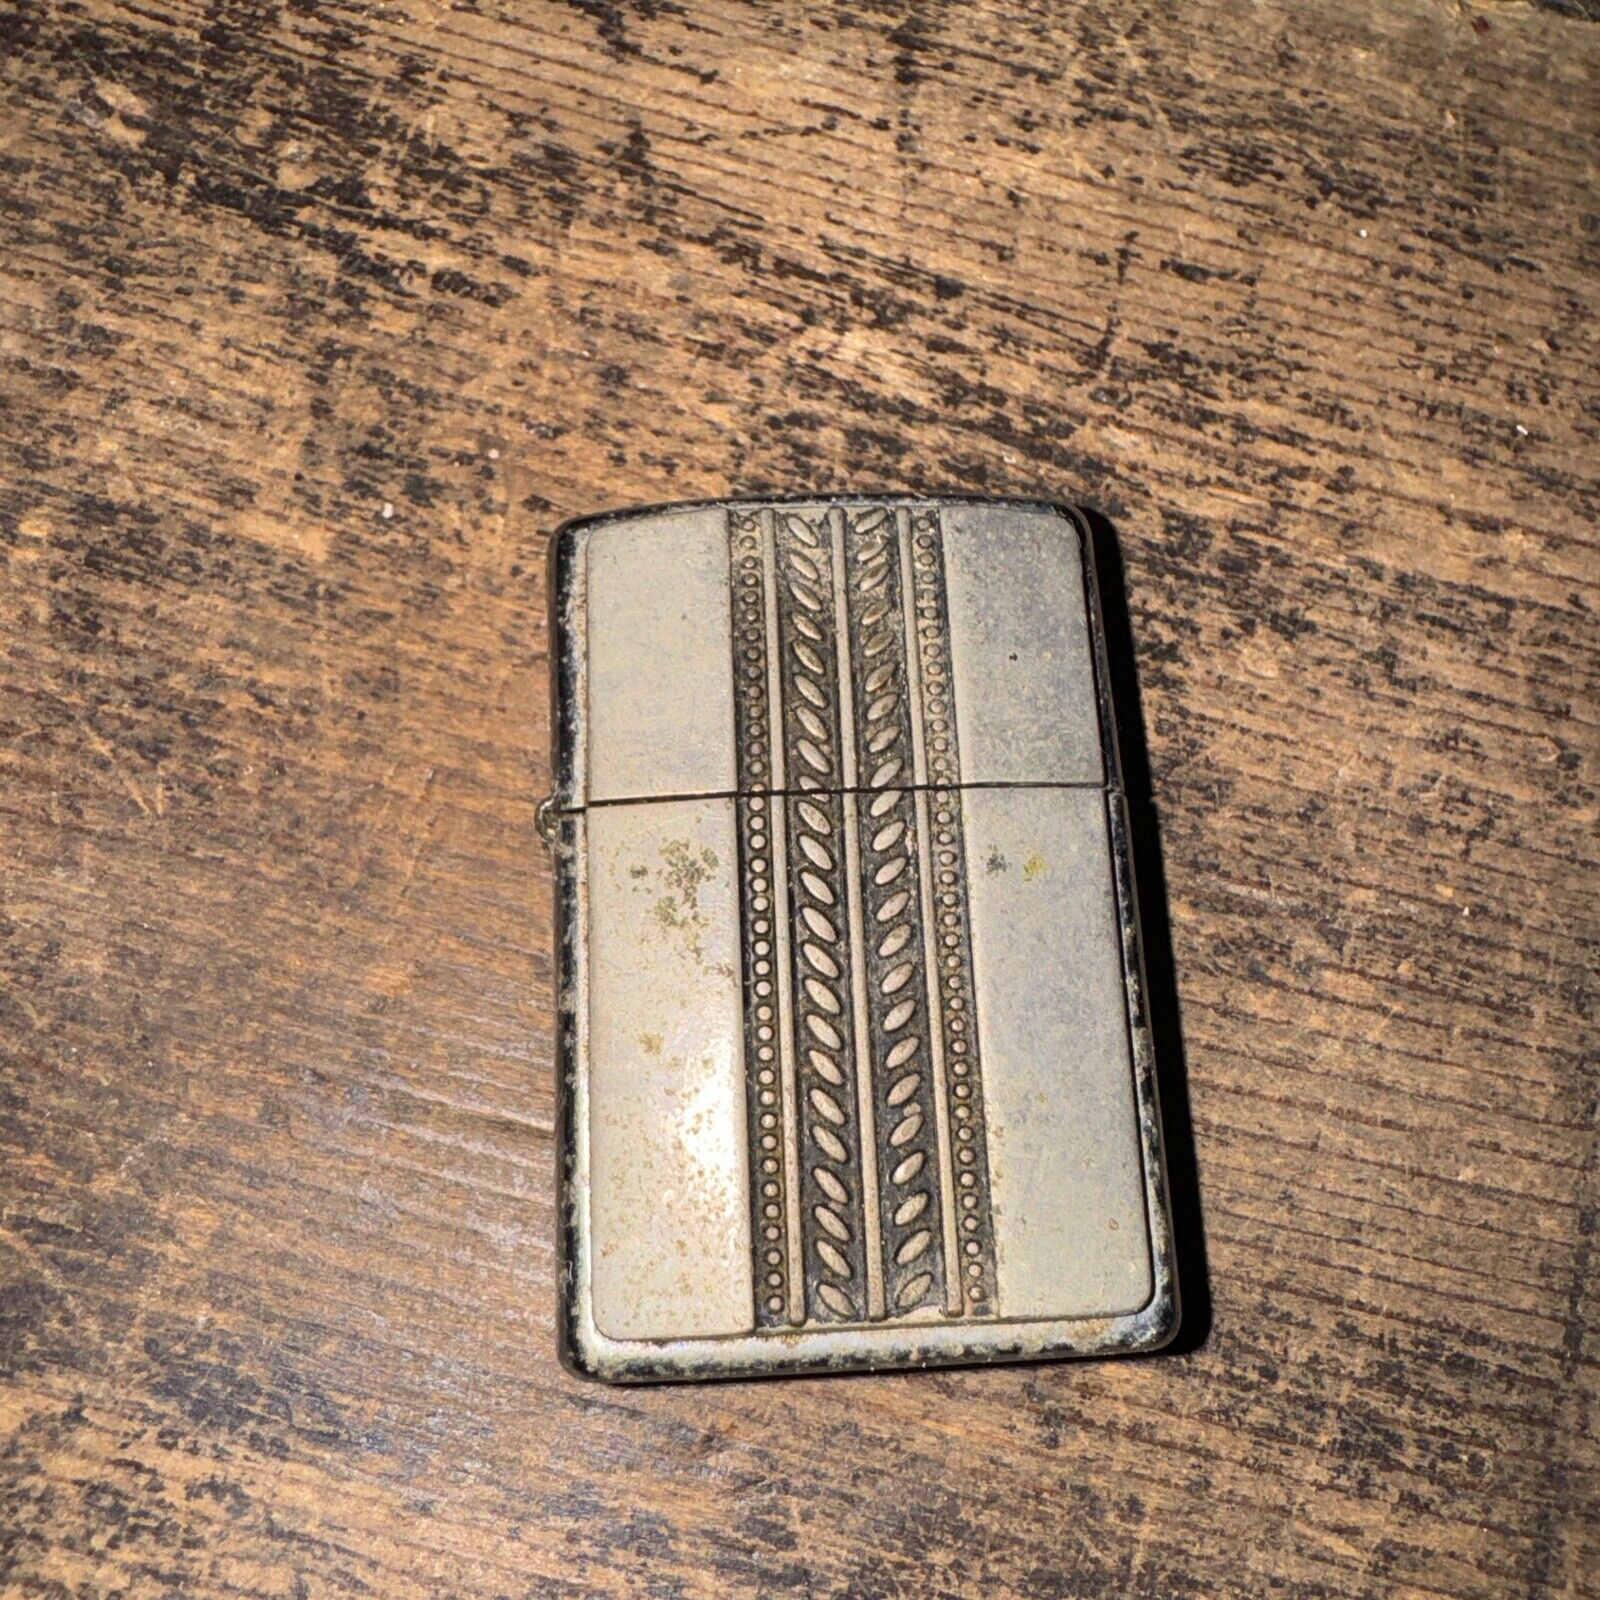 2002 Vintage Zippo Lighter - 669 Braided Silver - After Hours Collection